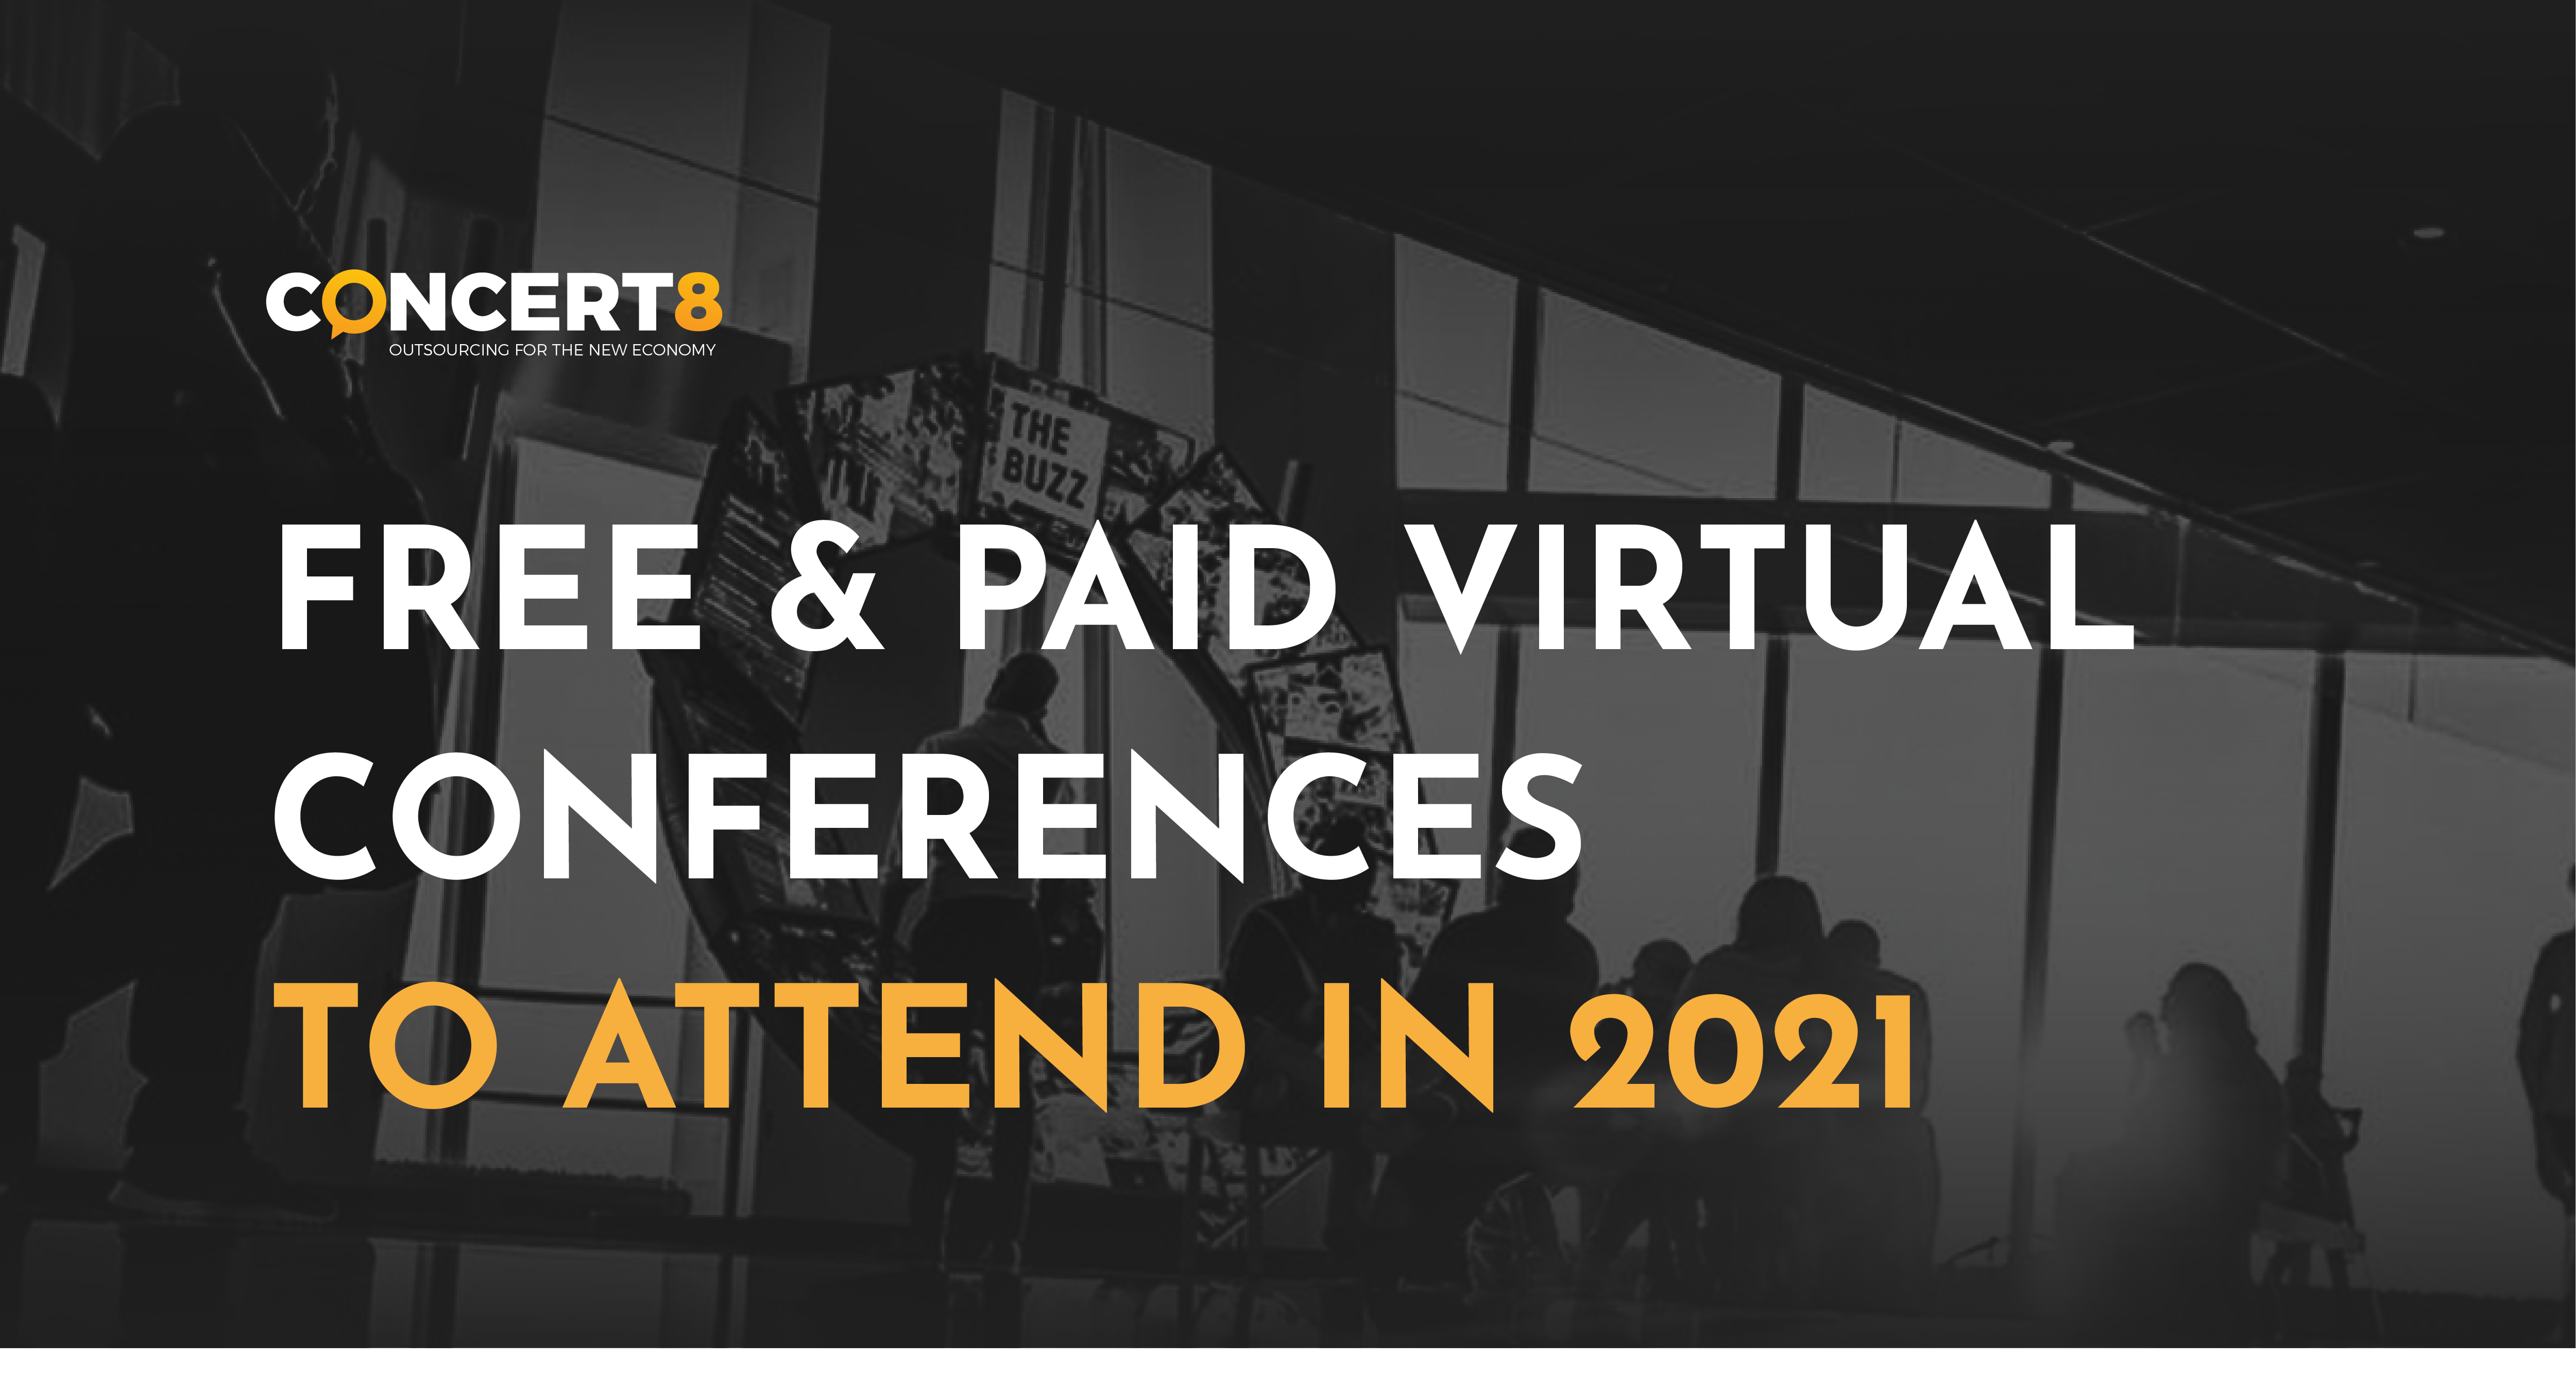 Free & Paid Virtual Conferences to Attend in 2021 - Concert8